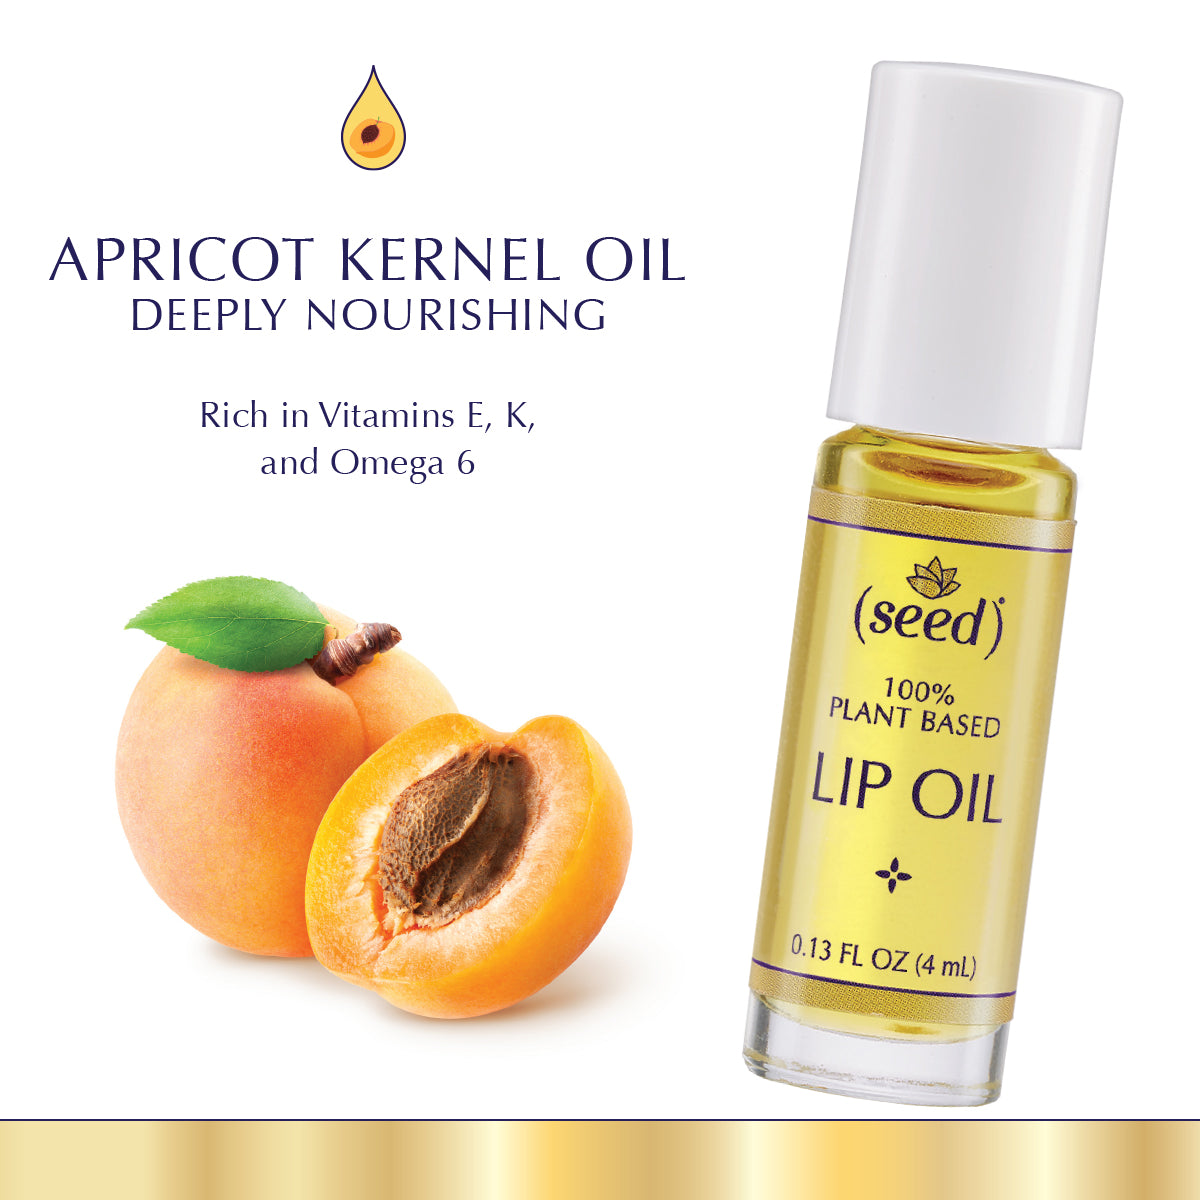 Seed Lip Oil features deeply nourishing apricot kernel oil